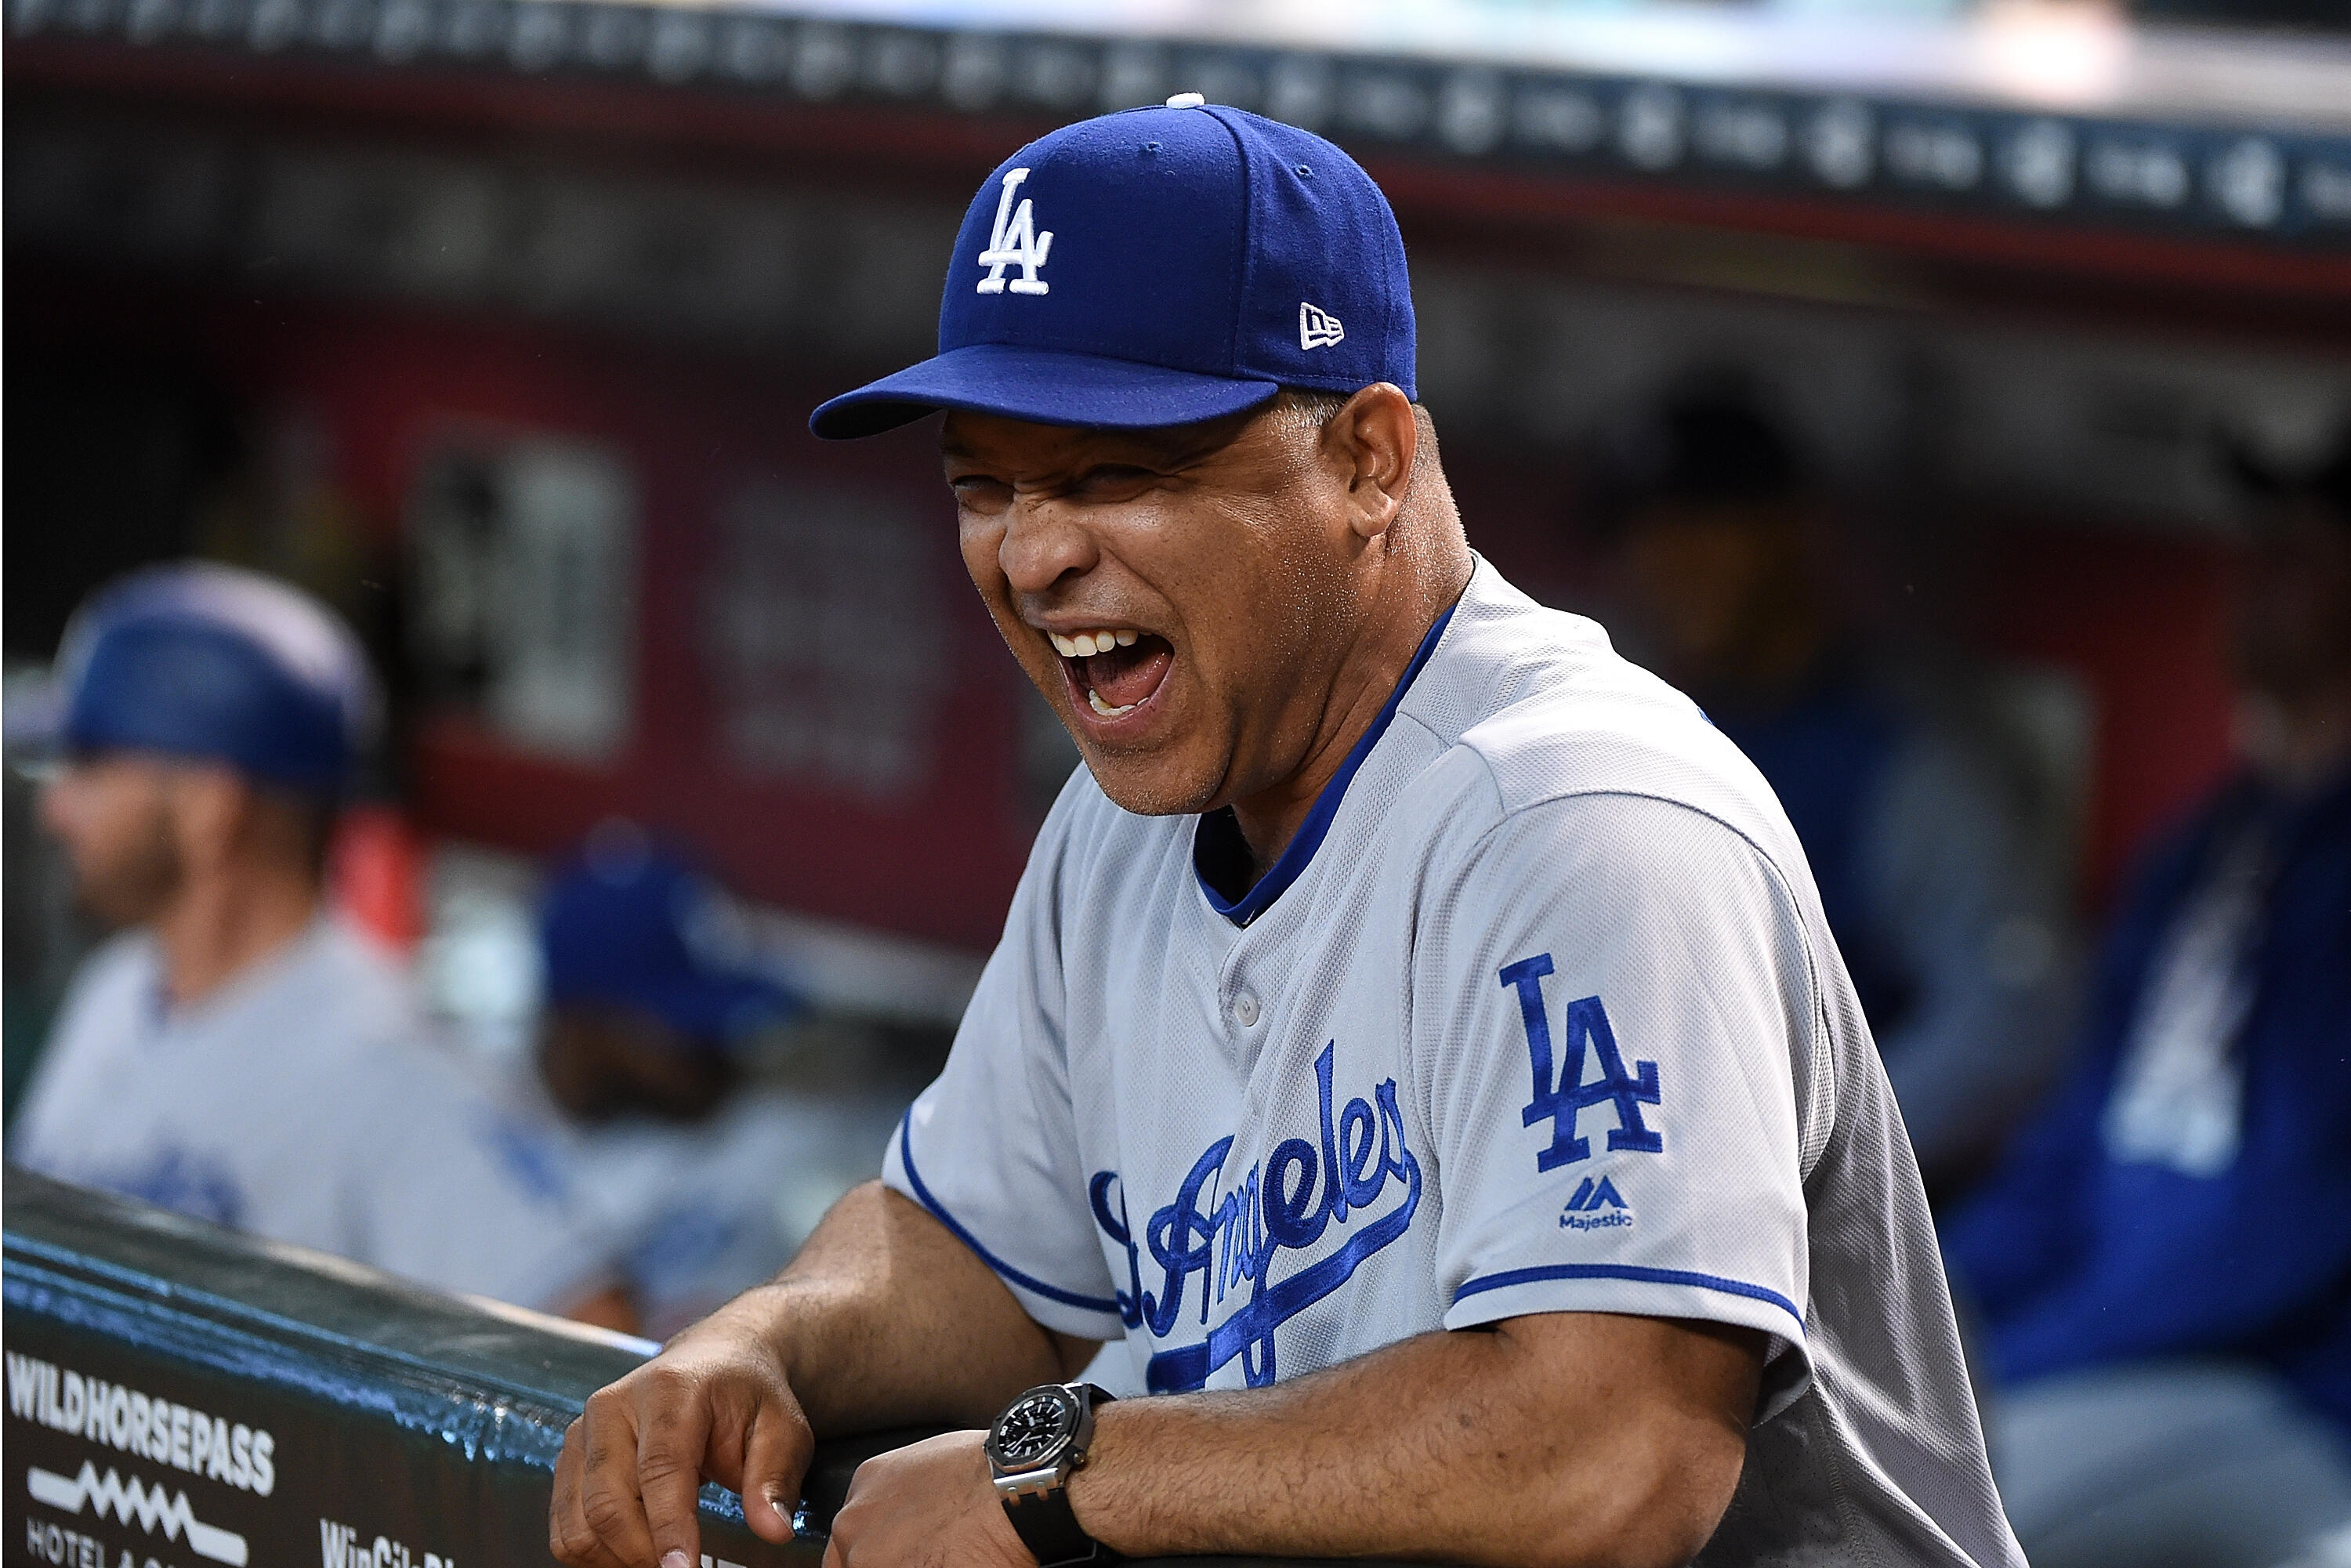 PHOENIX, AZ - APRIL 22:  Manager Dave Roberts #30 of the Los Angeles Dodgers prepares for a game against the Arizona Diamondbacks at Chase Field on April 22, 2017 in Phoenix, Arizona.  (Photo by Norm Hall/Getty Images)